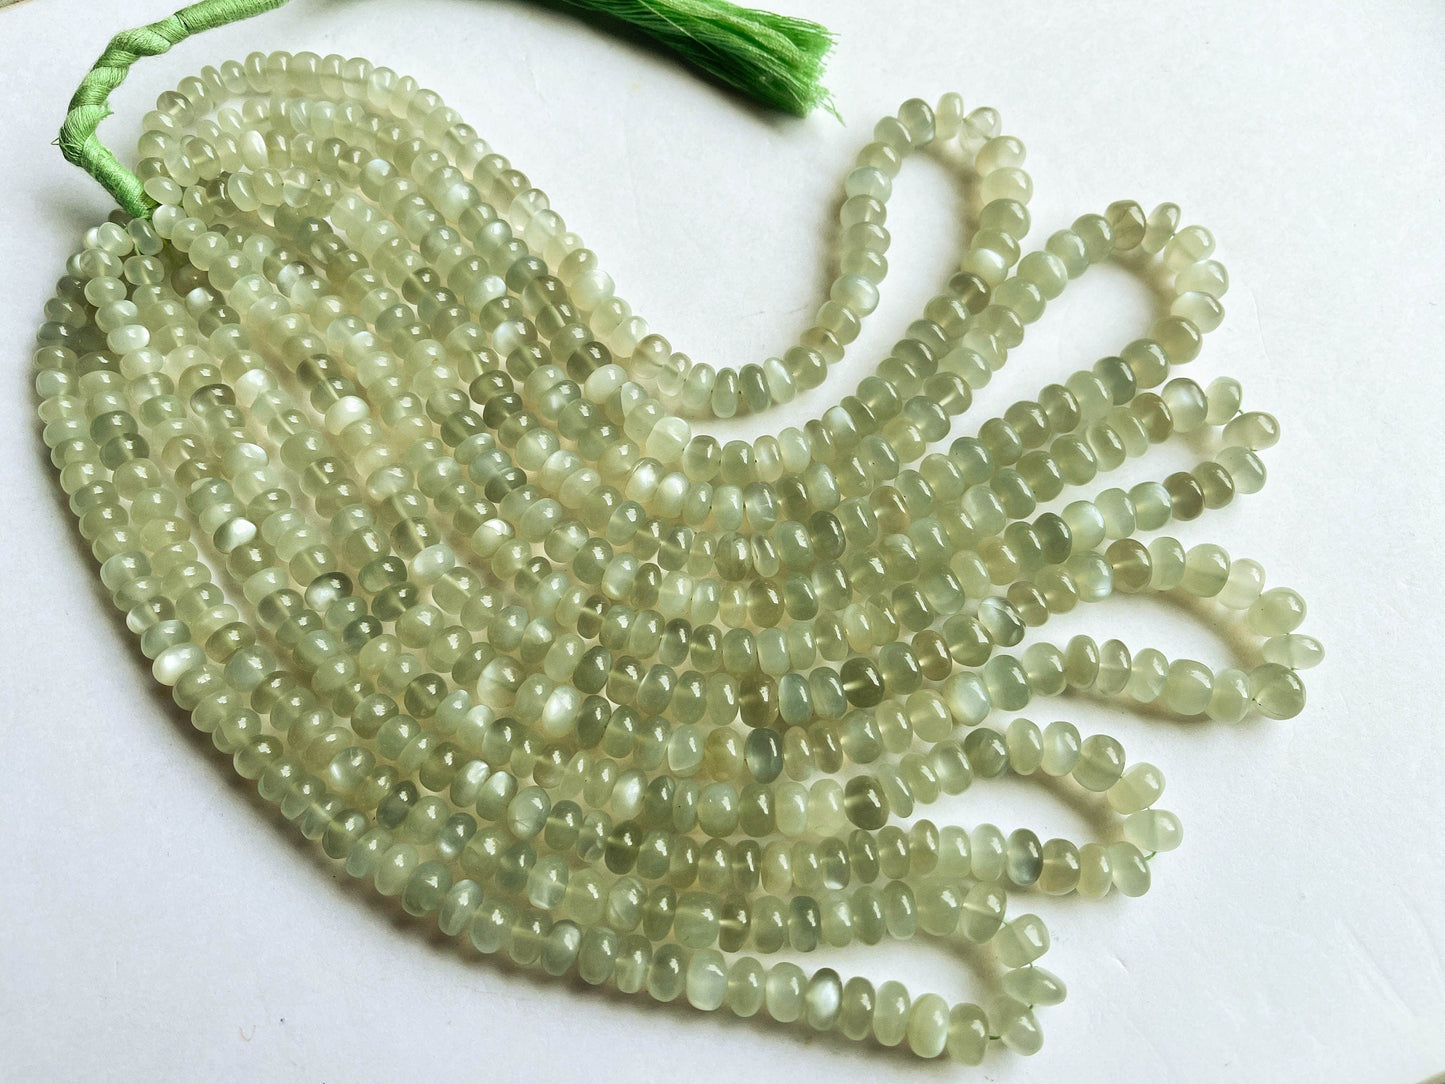 16 Inch Green Moonstone Smooth Rondelle Beads, Green Moonstone Beads, Green Moonstone Rondelle Beads Beadsforyourjewelry